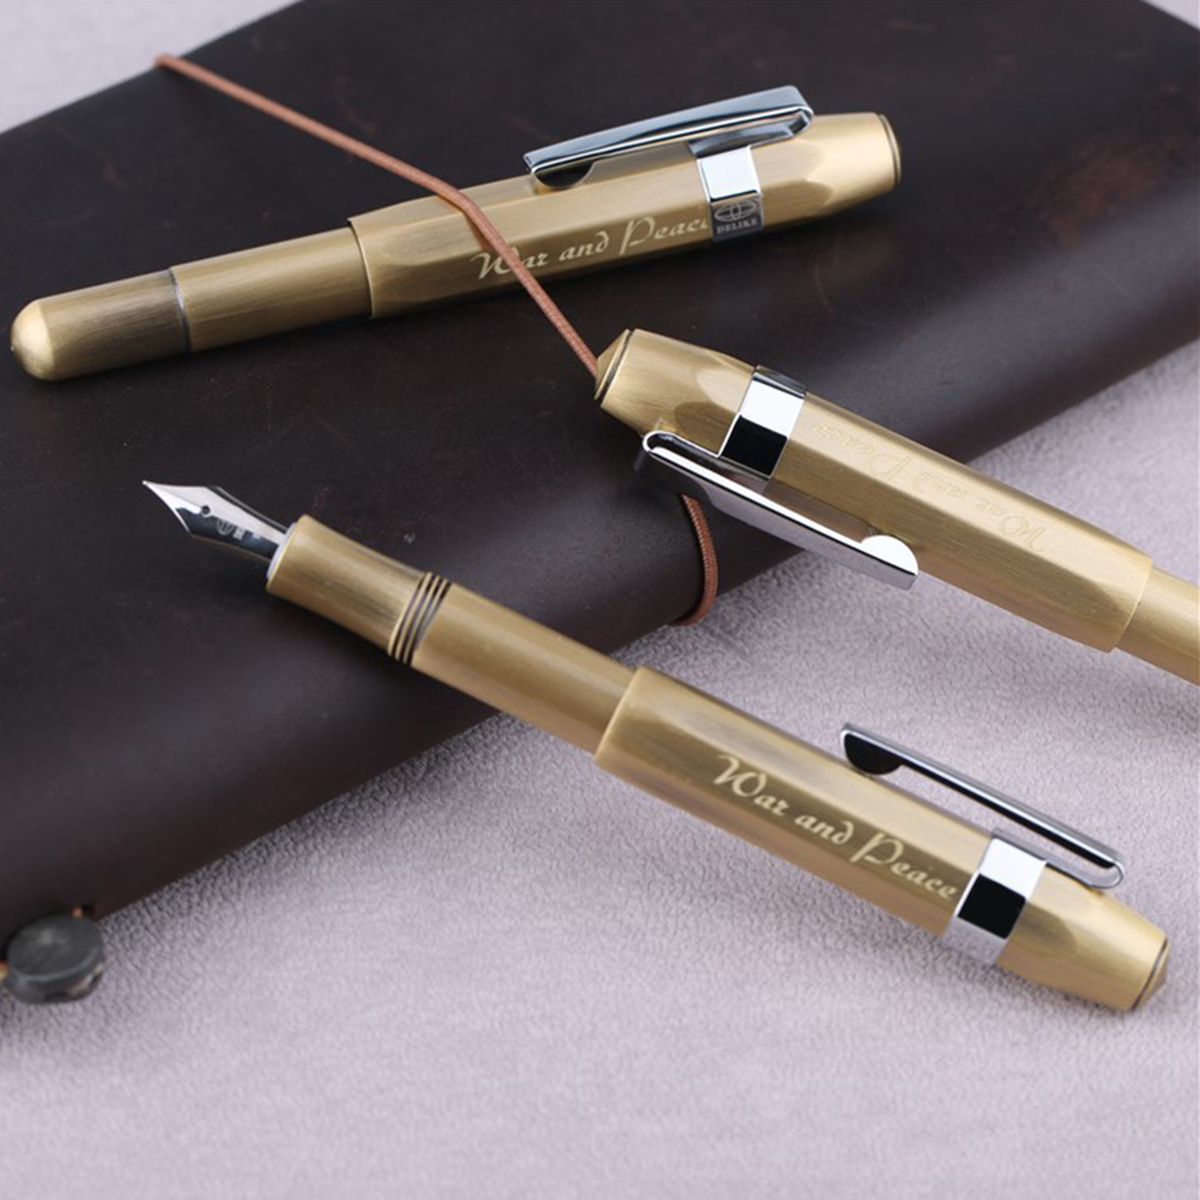 Metal-Fountain-Pen-Short-Smooth-Calligraphy-Writing-Pen-Ink-Gel-Pen-with-Iron-Case-Gift-for-Students-1755553-3